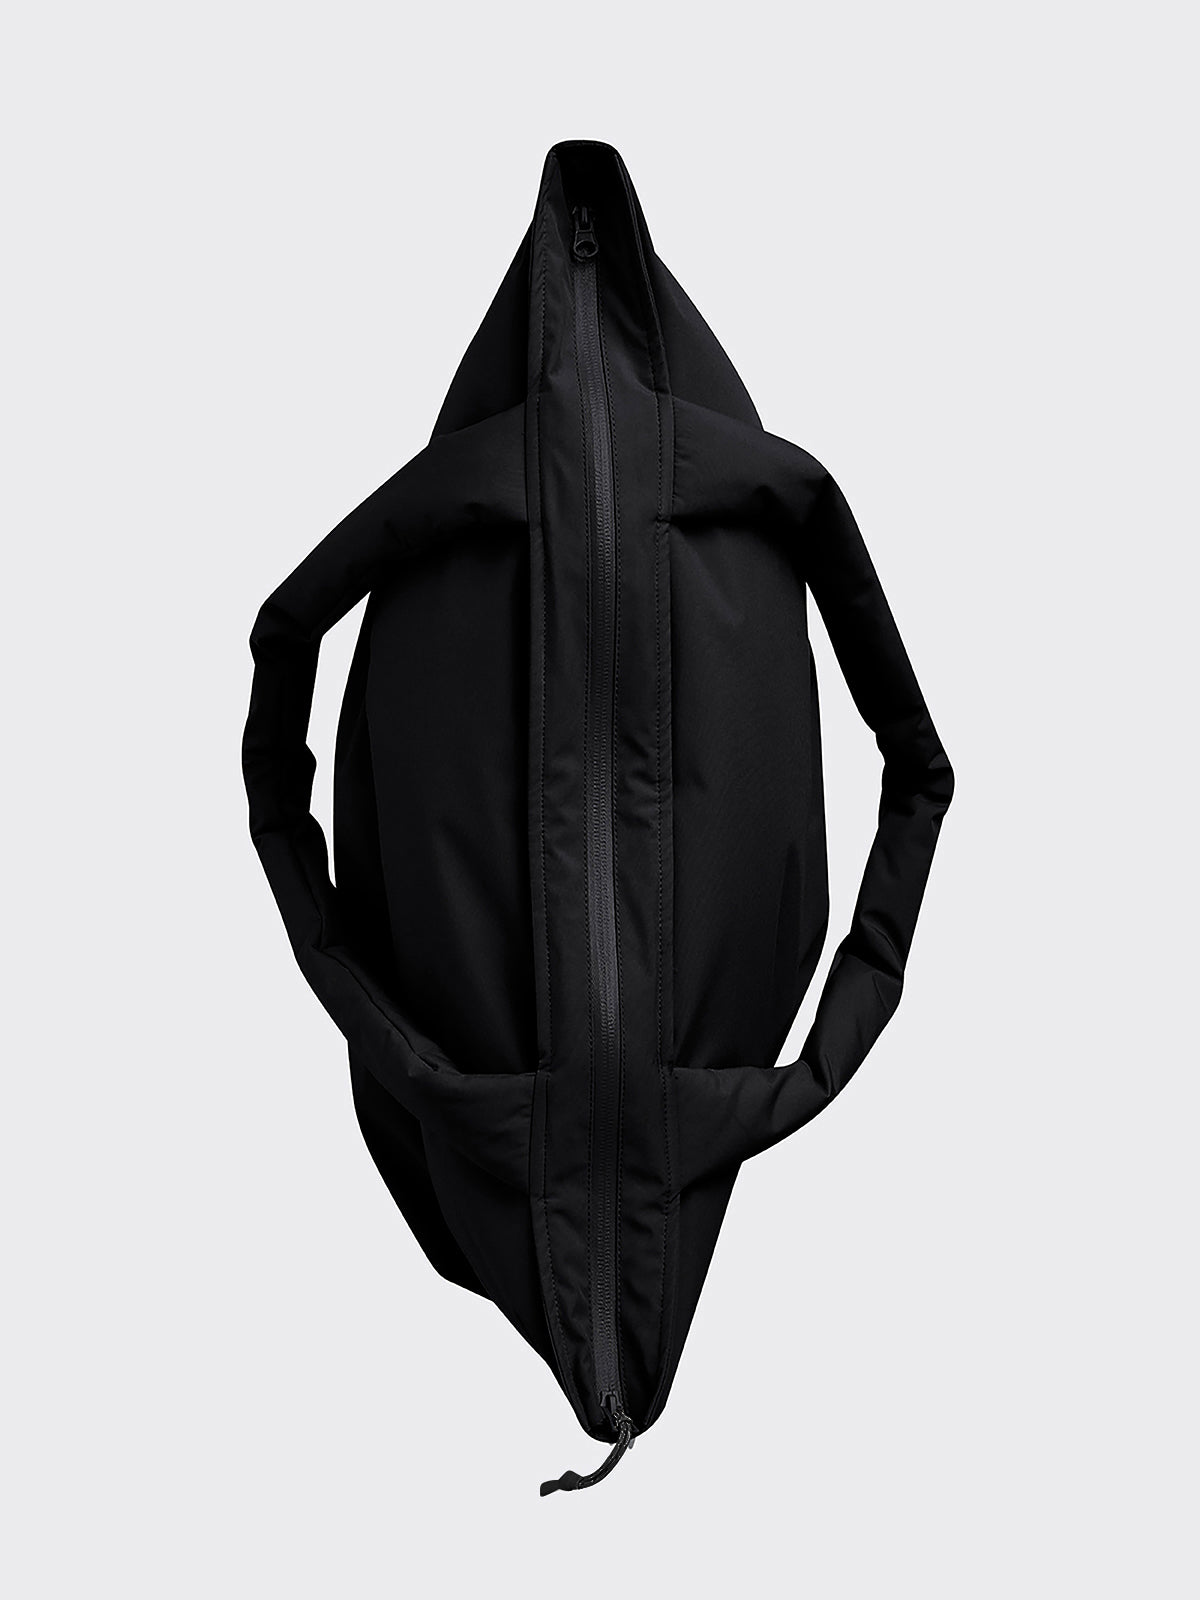 Pillow bag from Blæst in Black